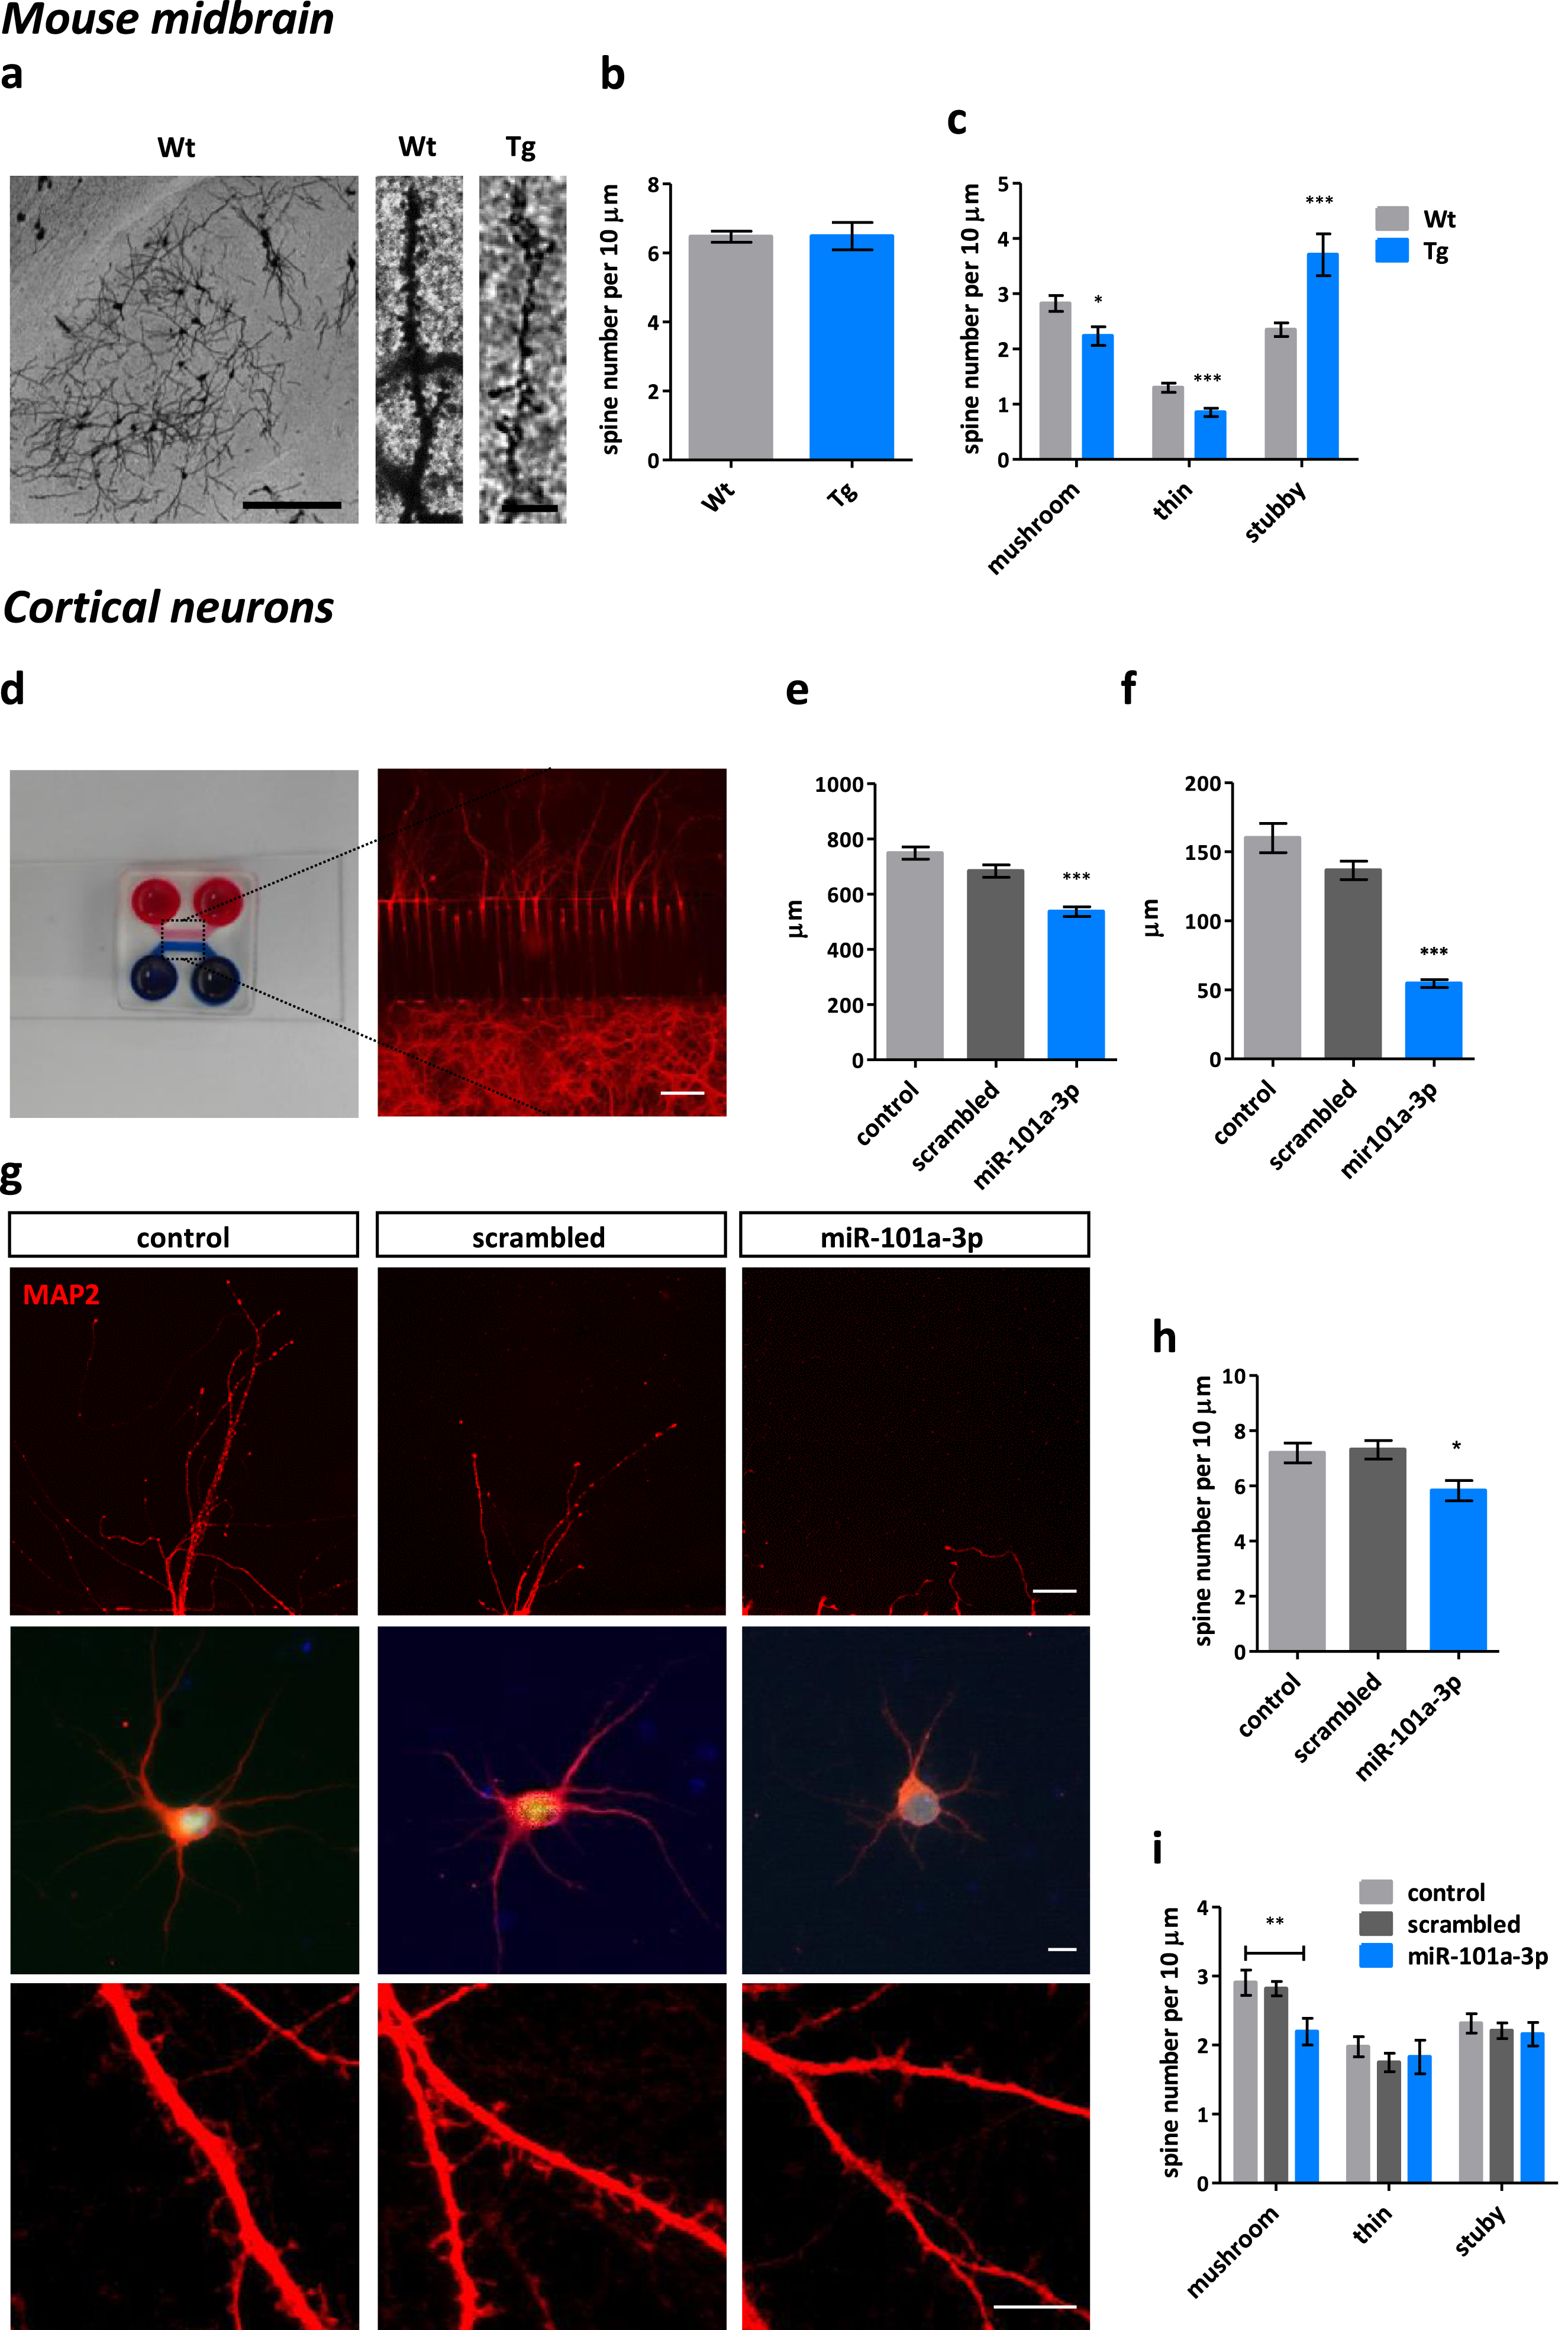 miR-101a-3p reduces dendritic length and alters dendritic spine morphology in vivo and in vitro. a) Representative Golgi-Cox staining images of the analyzed brain region in Wt mouse; brightfield; scale bar = 200μm; and dendritic spine segments of Wt and Tg animals; brightfield; scale bar = 10μm. b) Quantification of total dendritic spines per 10μm dendrite and c. classified as mushroom, thin and stubby in Wt (n = 3) and Tg (n = 3) mice. (n≥45×10μm segments per condition manually counted with Fiji software). d) Photo of the custom made MFD; upper wells and chamber are filled with red dye and the bottom with blue dye. Fluorescent image of neurons cultured in the bottom chamber and the dendrites growing to the upper chamber through the microgrooves; MAP2 - red; scale bar = 200μm. e) Bar graph of average length (μm) of distal dendrites growing through the microgrooves of MFDs of neurons infected with control vector expressing only GFP (control), vector expressing GFP and scrambled miRNA sequence (scrambled) and vector expressing GFP and miR-101a-3p (miR-101a-3p) (n = 3 individual experiments×3 MFDs per condition). f) Bar graph of average length (μm) of apical dendrites in sparsely cultured infected neurons (n≥25 cells from 4 individual experiments per condition). g) Representative images of dendrites at the exit point to the upper chamber of the MFDs; MAP2 - red; scale bar = 50μm, single infected neurons; GFP – green; MAP2 - red; Hoechst – blue; scale bar = 10μm and dendritic spine segments; MAP2 – red; scale bar = 50μm. h) Quantification of total dendritic spine number and i) classification of mushroom, thin and stubby dendritic spines per 10μm dendrite of infected neurons (n≥32×10μm segments per condition manually counted with Fiji software). All data are expressed as mean±SEM; Student’s t-test; *p < 0.05, **p < 0.01, ***p < 0.001).